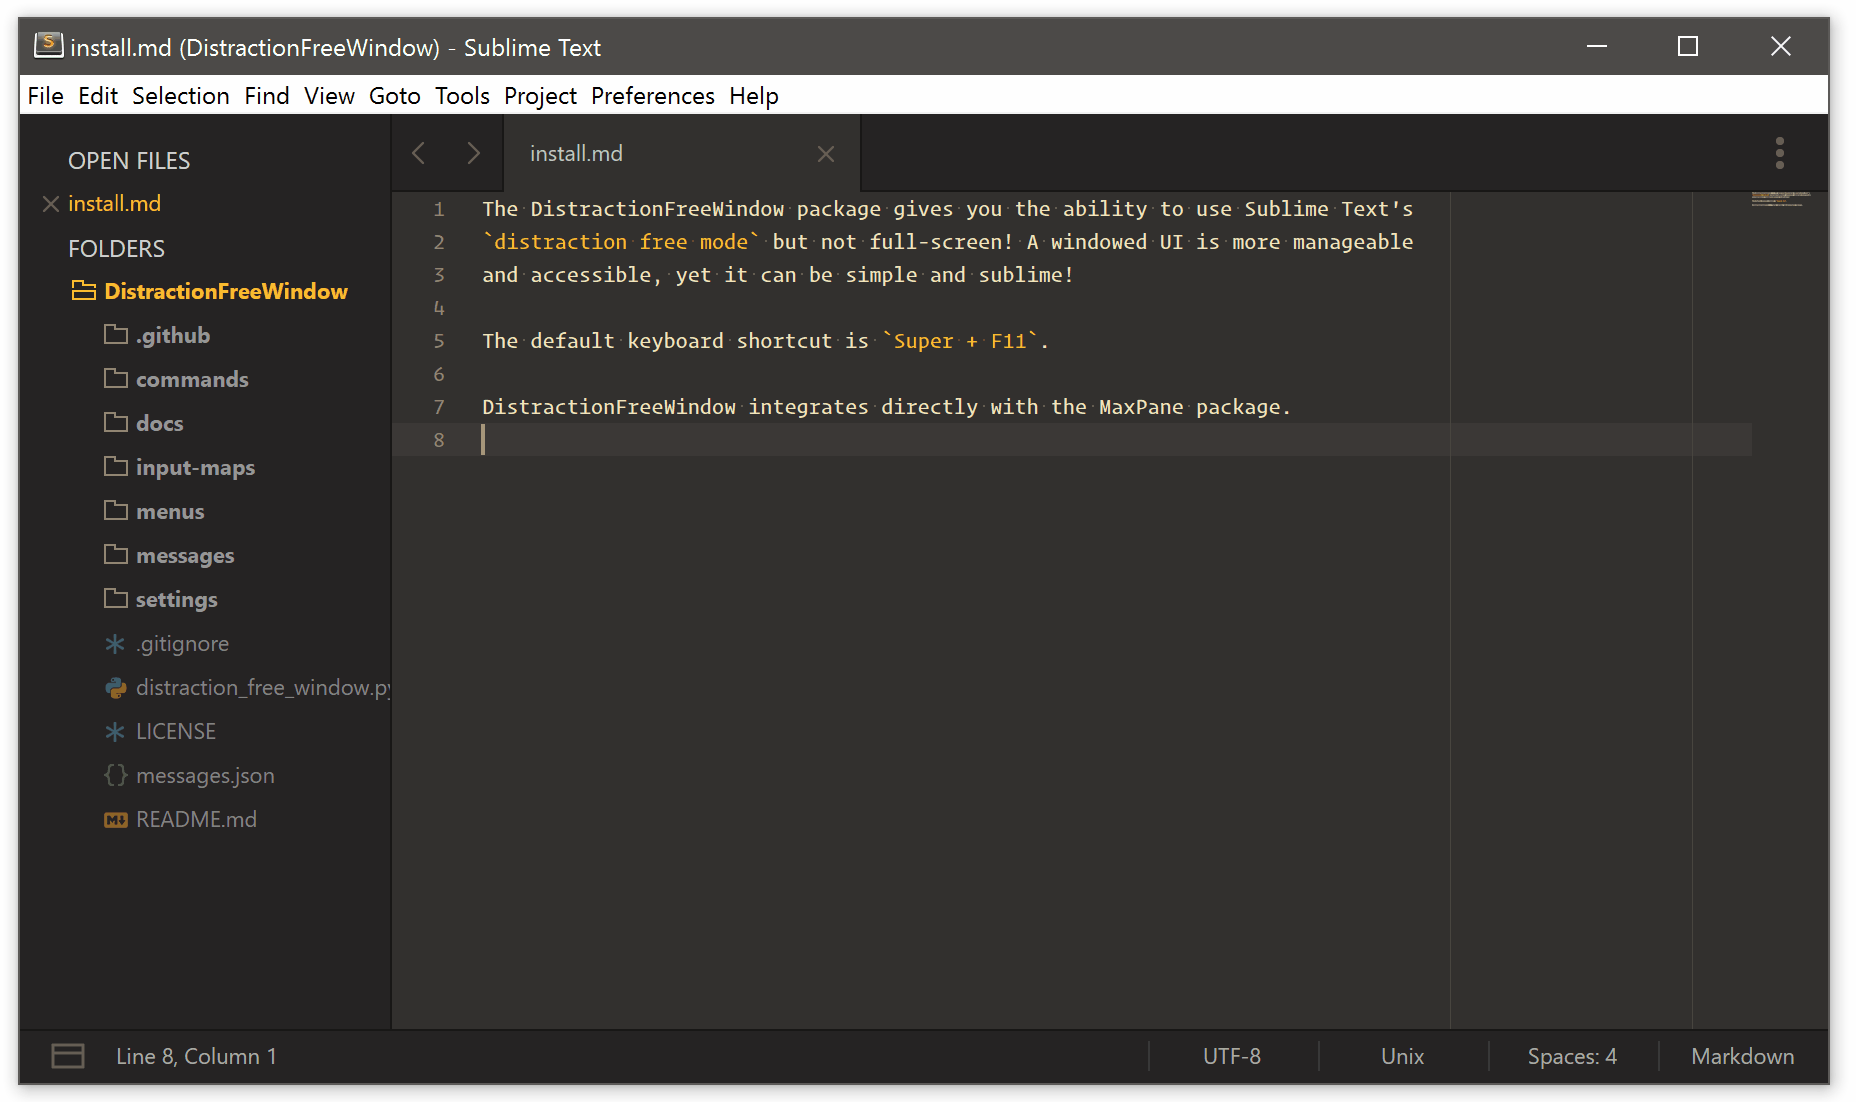 How to crack sublime text